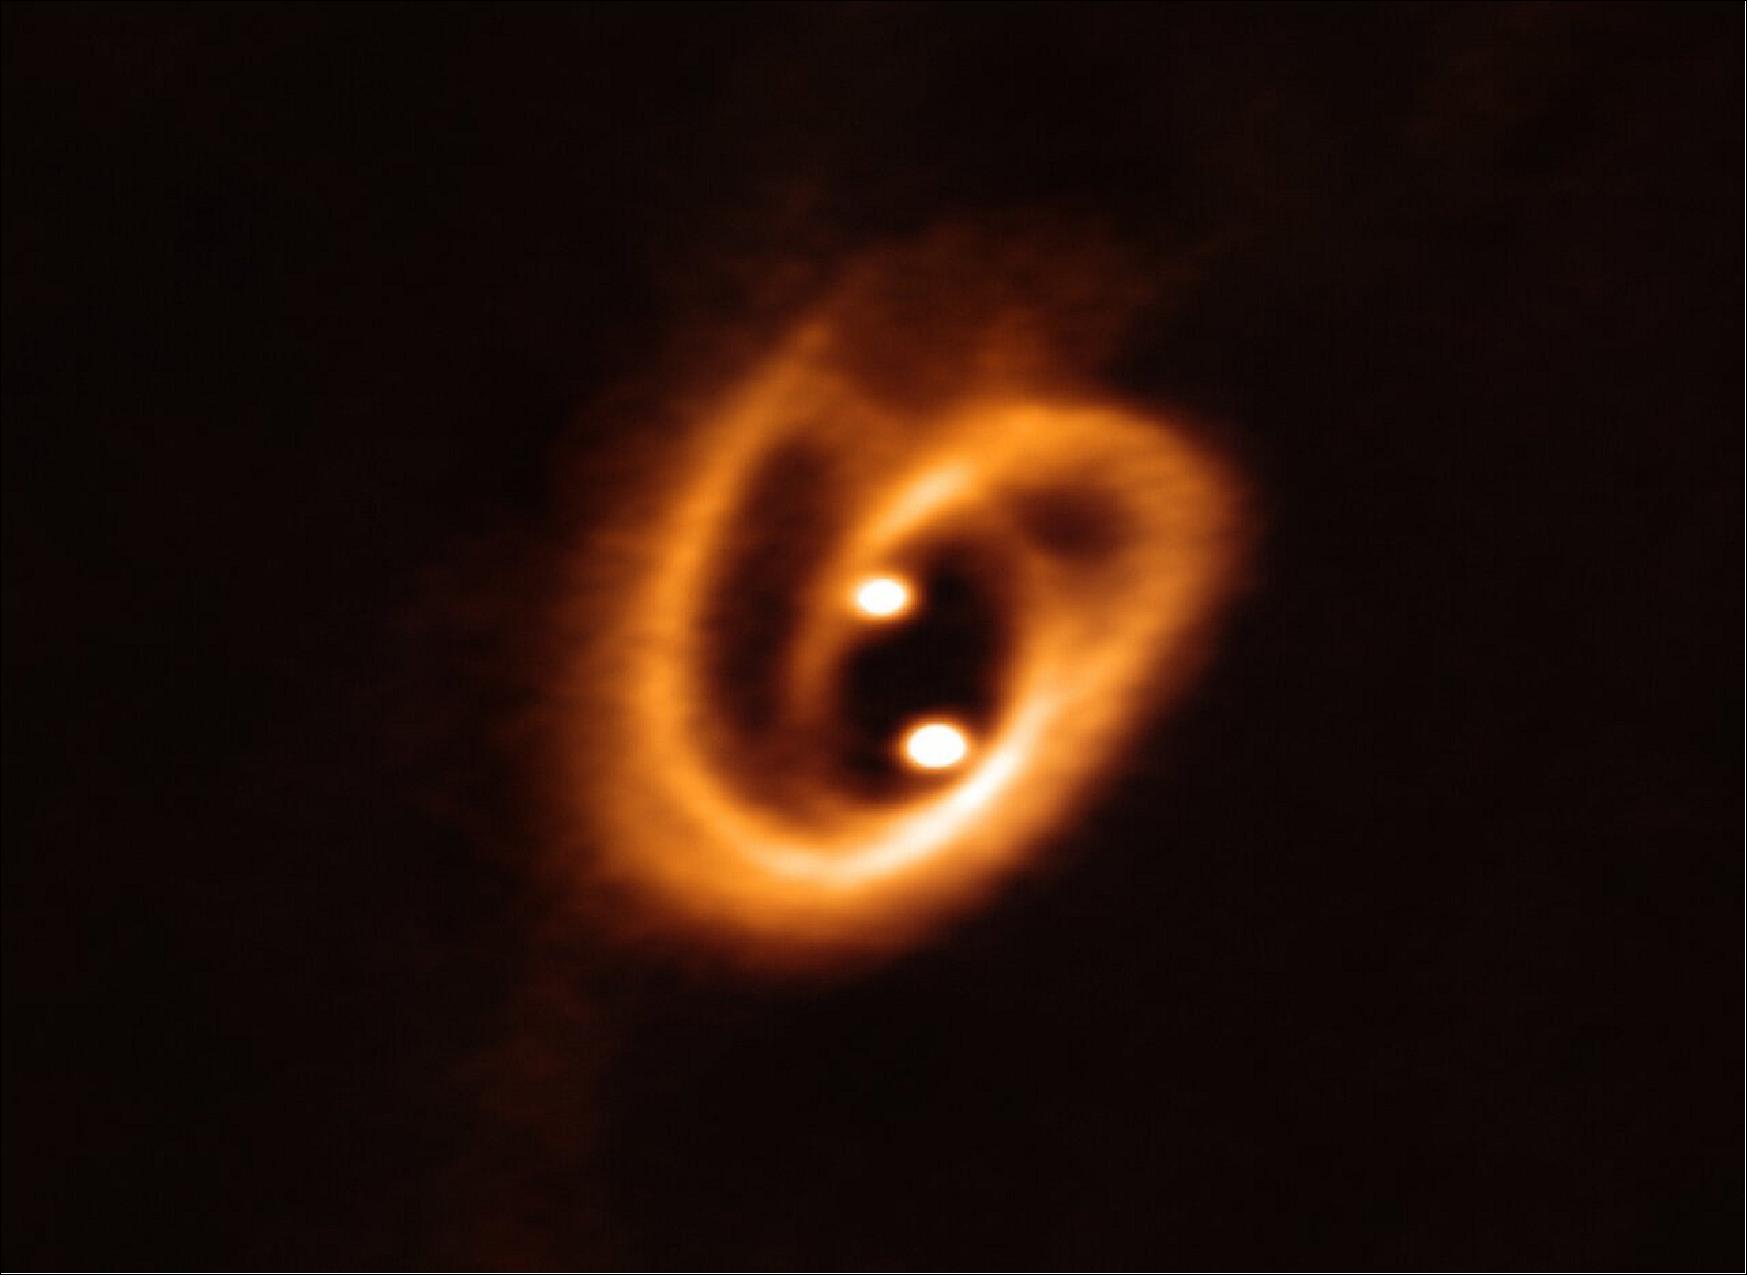 Figure 83: ALMA captured this unprecedented image of two circumstellar disks, in which baby stars are growing, feeding with material from their surrounding birth disk. The complex network of dust structures distributed in spiral shapes remind of the loops of a pretzel. These observations shed new light on the earliest phases of the lives of stars and help astronomers determine the conditions in which binary stars are born (image credit: ALMA (ESO/NAOJ/NRAO), Alves et al.)